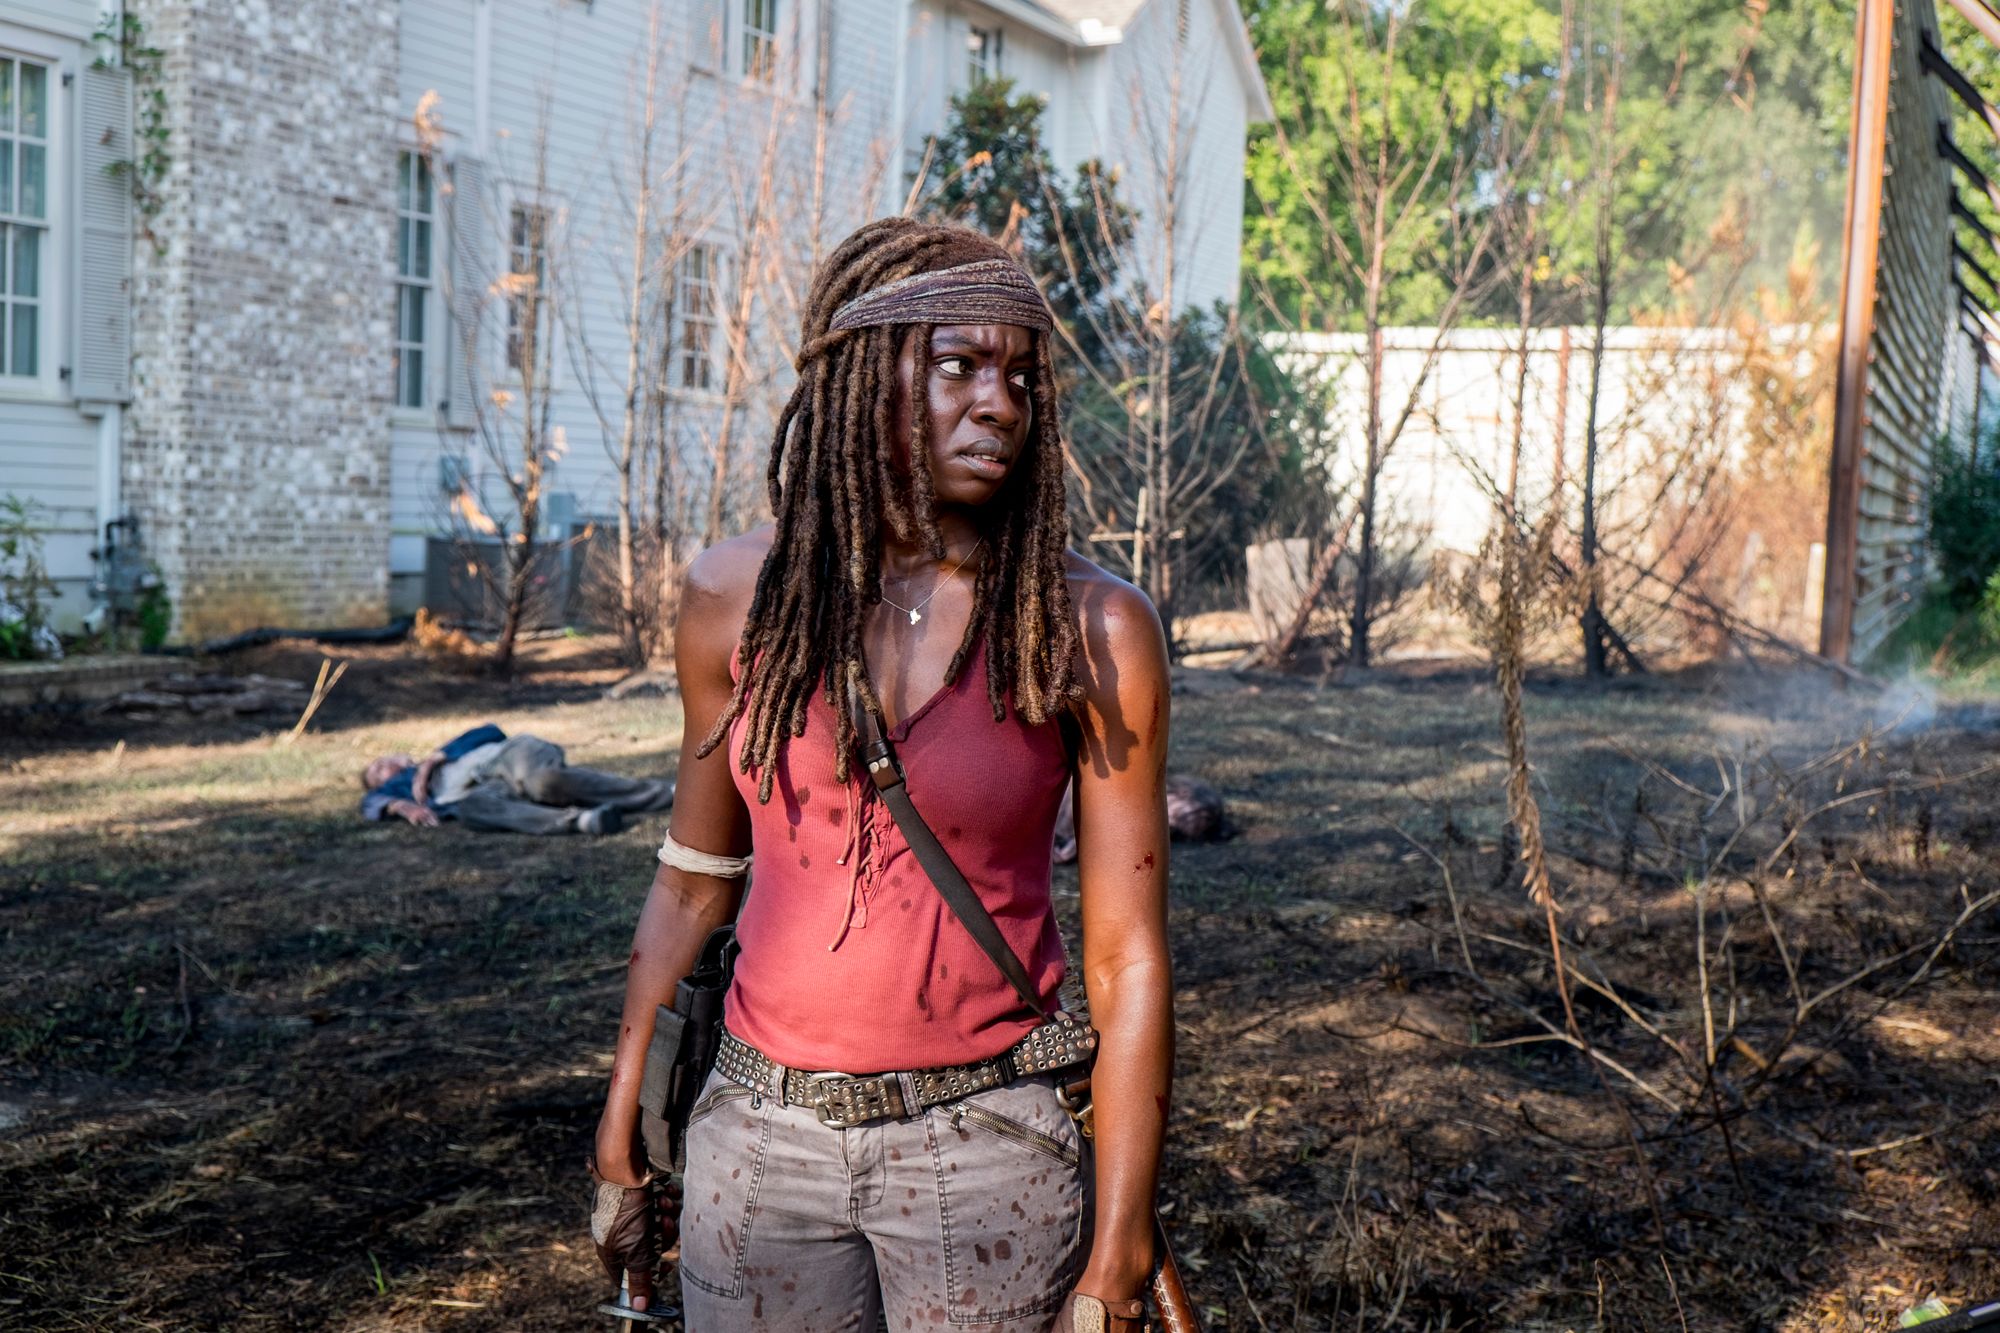 EXCLUSIVE Rick Michonne and Negan Return in New Walking Dead Photos